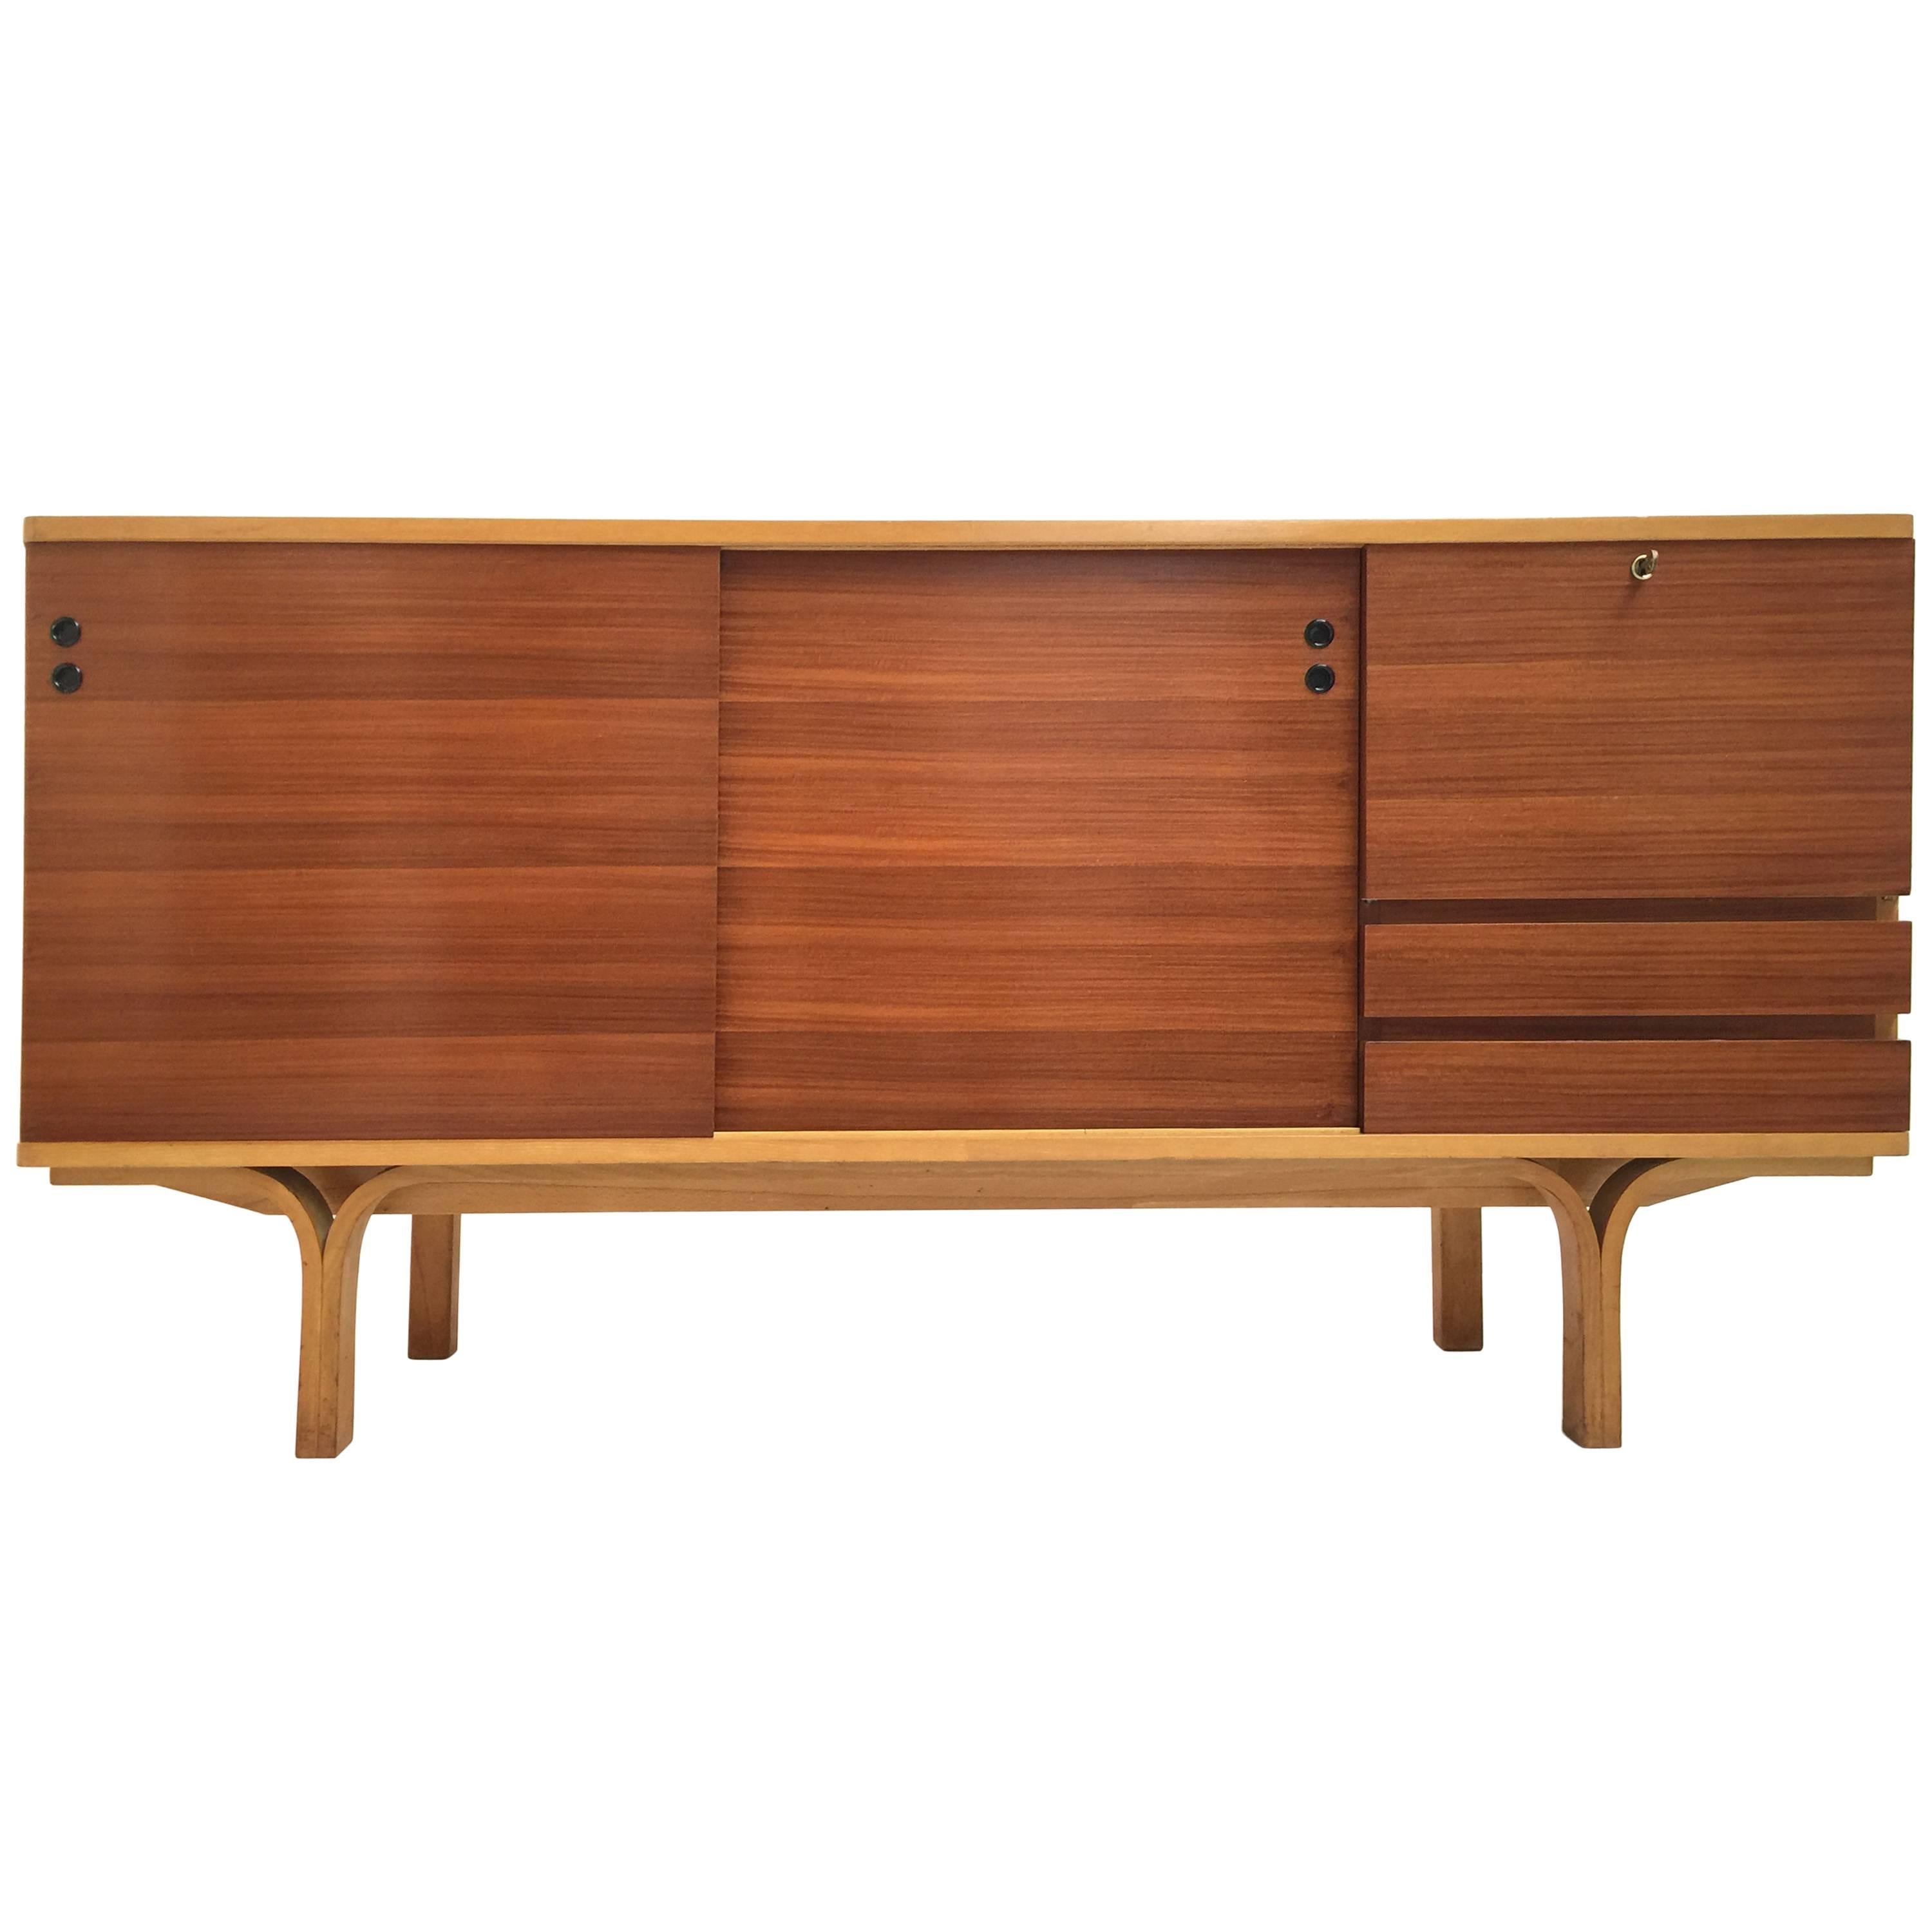 Stunning Ash and Mahogany Credenza Bar by J.A Motte, 1954 for Group 4 Charron